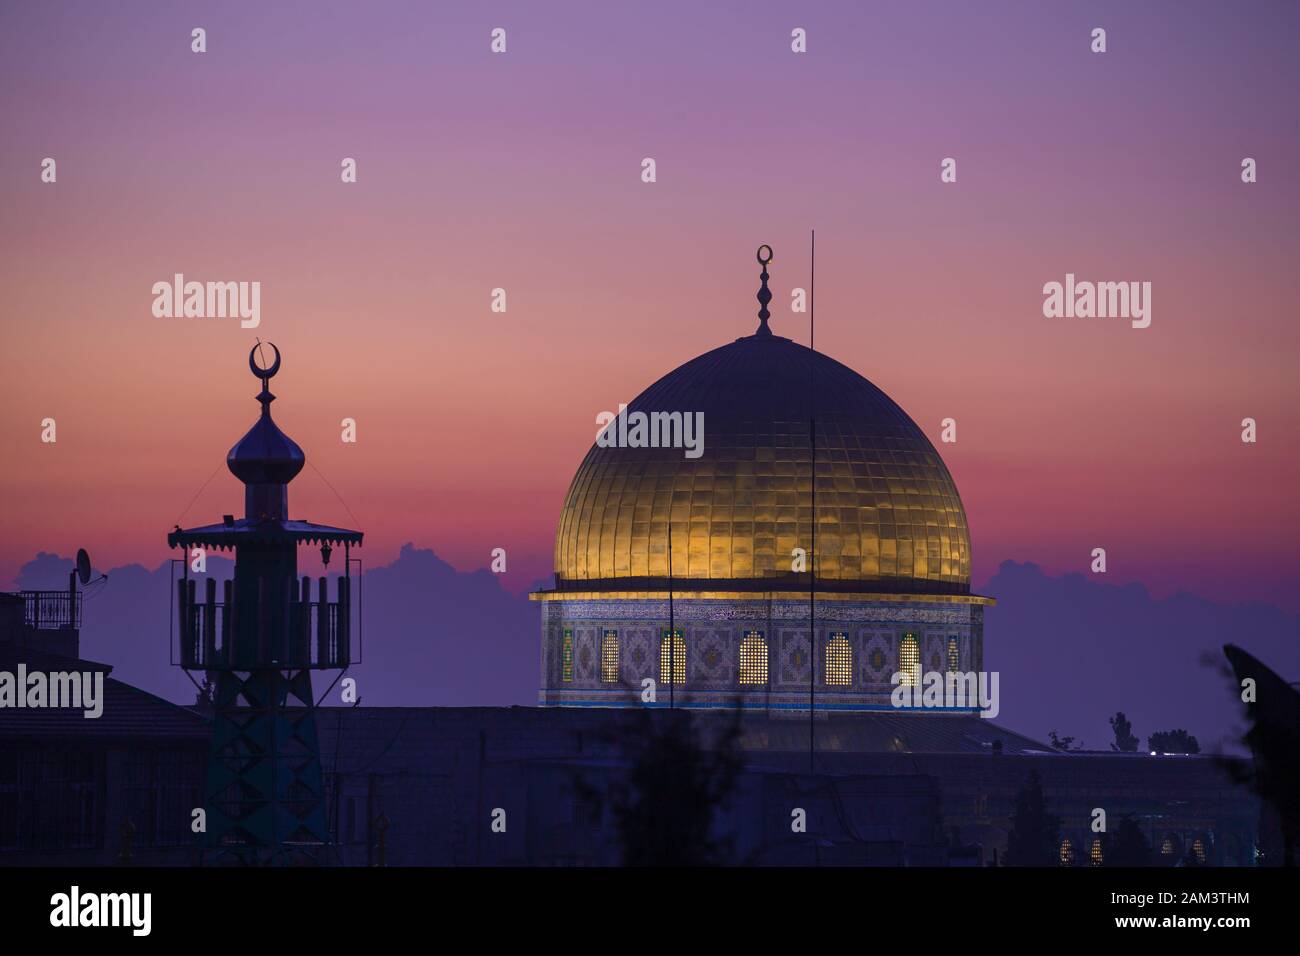 The Dome of the Rock in Jerusalem, Israel im Morgengrauen Stockfoto